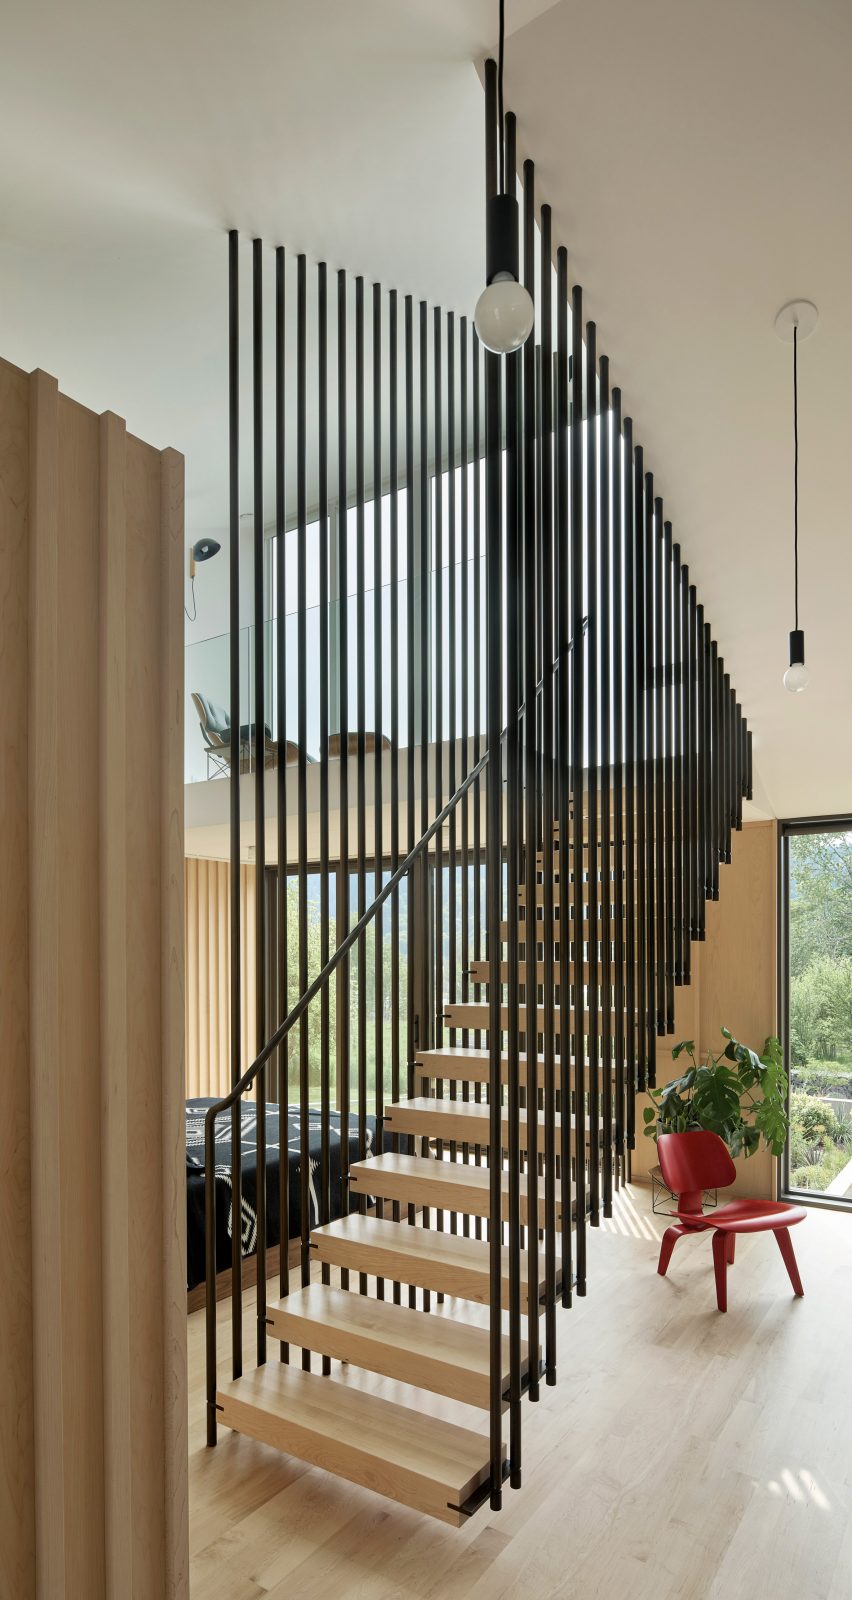 Floating staircase with metal railing